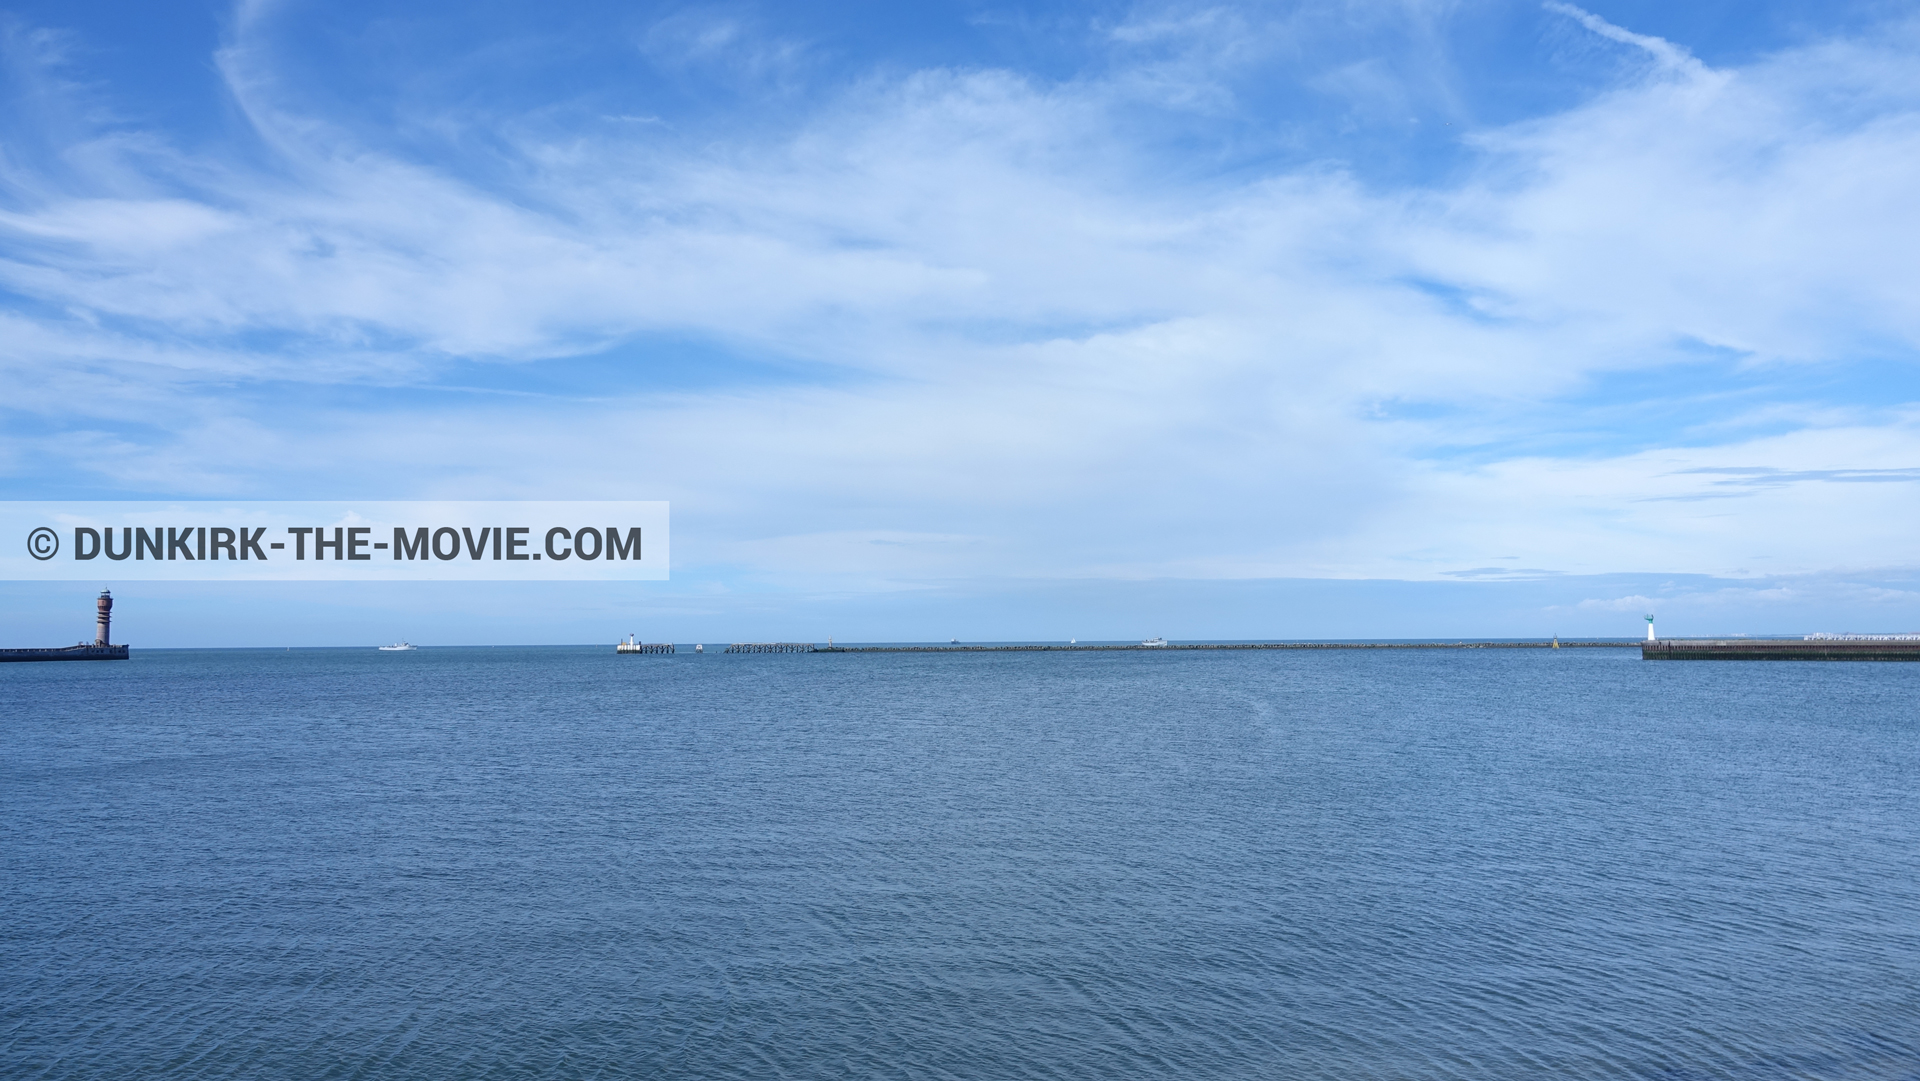 Picture with boat, cloudy sky, calm sea, St Pol sur Mer lighthouse,  from behind the scene of the Dunkirk movie by Nolan